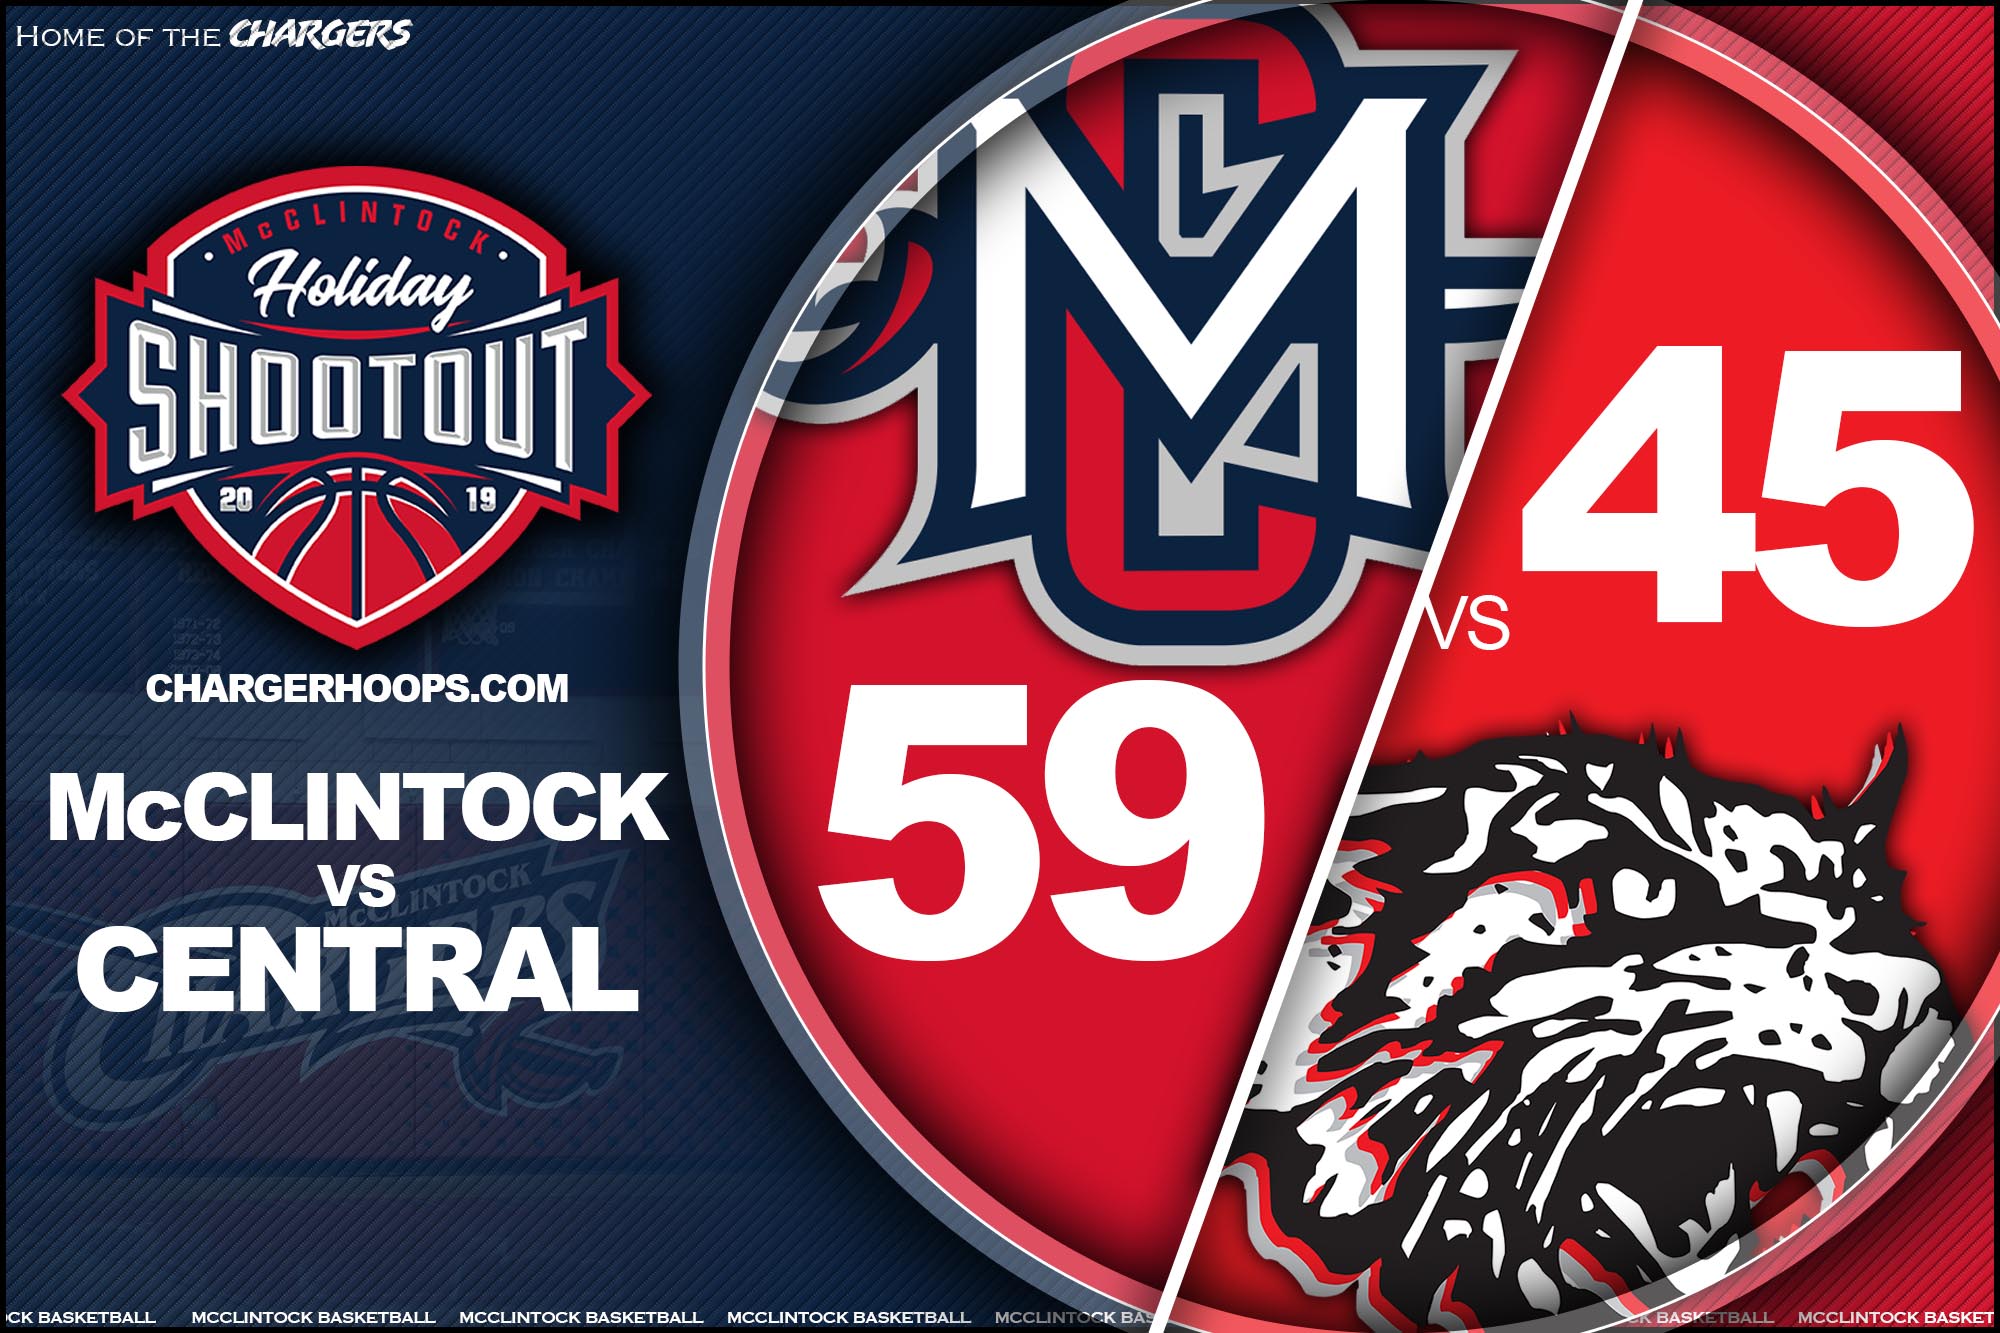 Game 6: McClintock 59 Central 45 Final